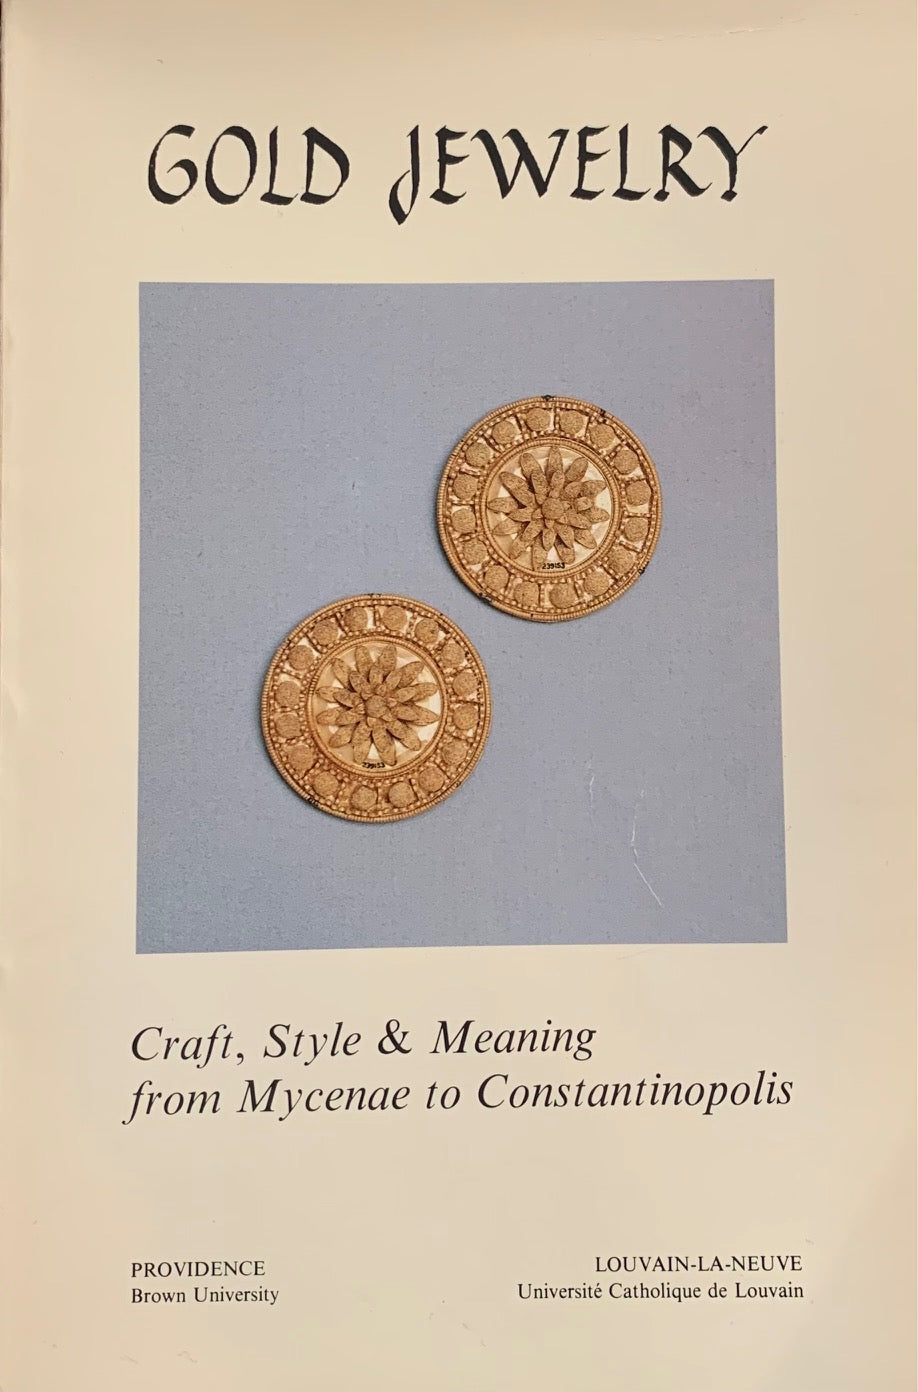 Gold jewelry. Craft, style and meaning from Mycenae to Constantinopolis.